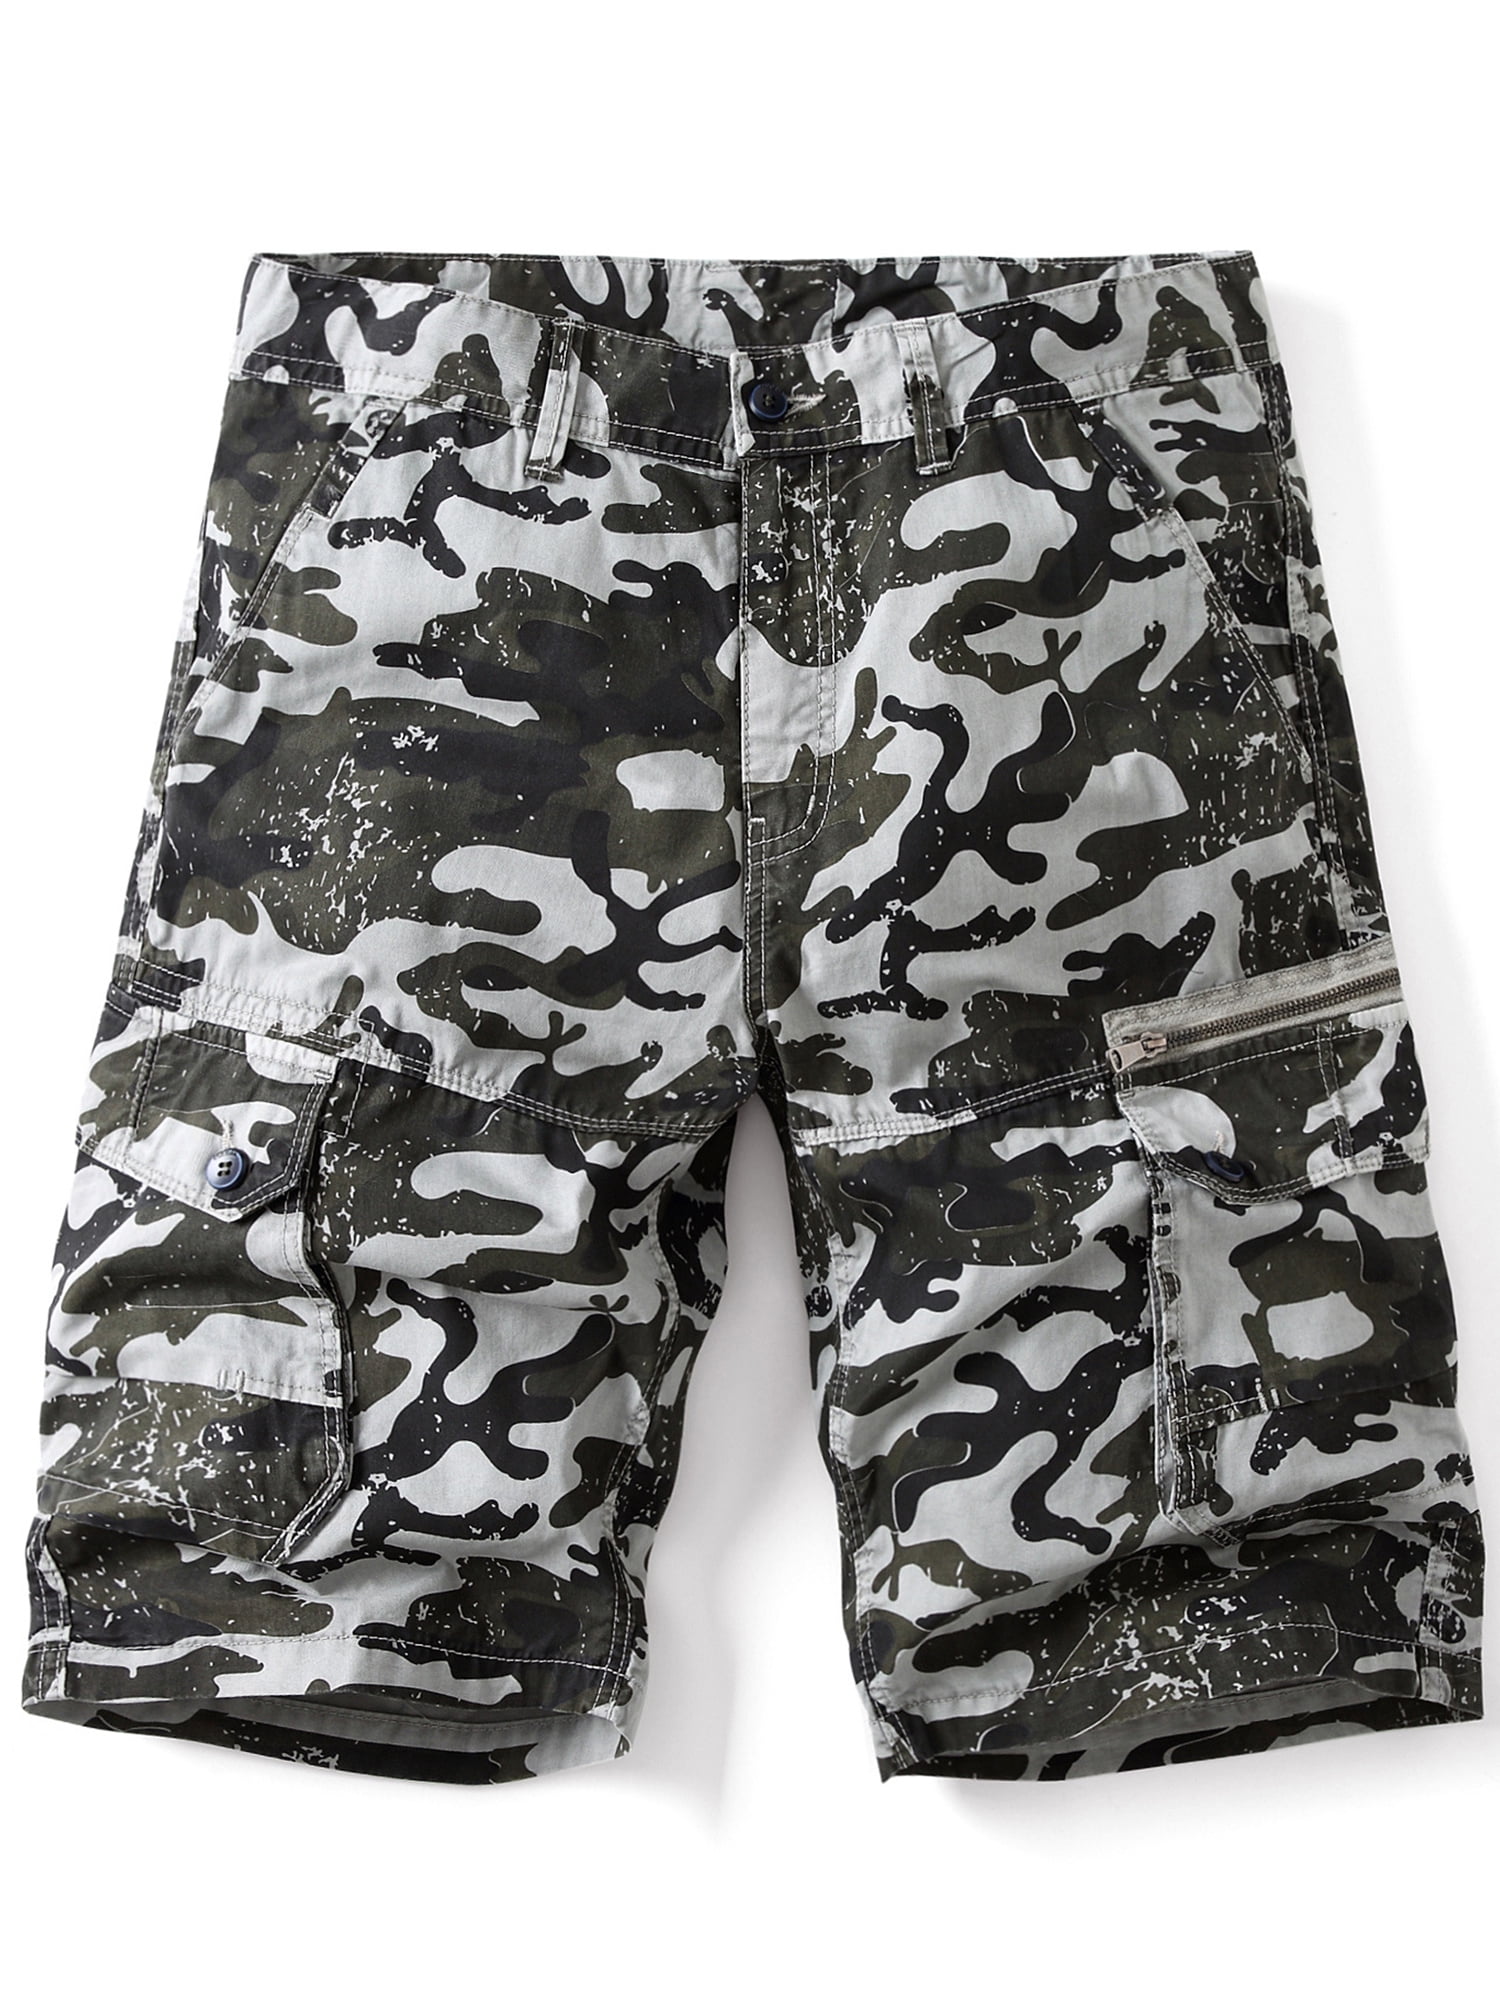 Allonly Mens Camouflage Casual Cotton Relaxed Fit Multi-Pocket Cargo Shorts Under Knee 